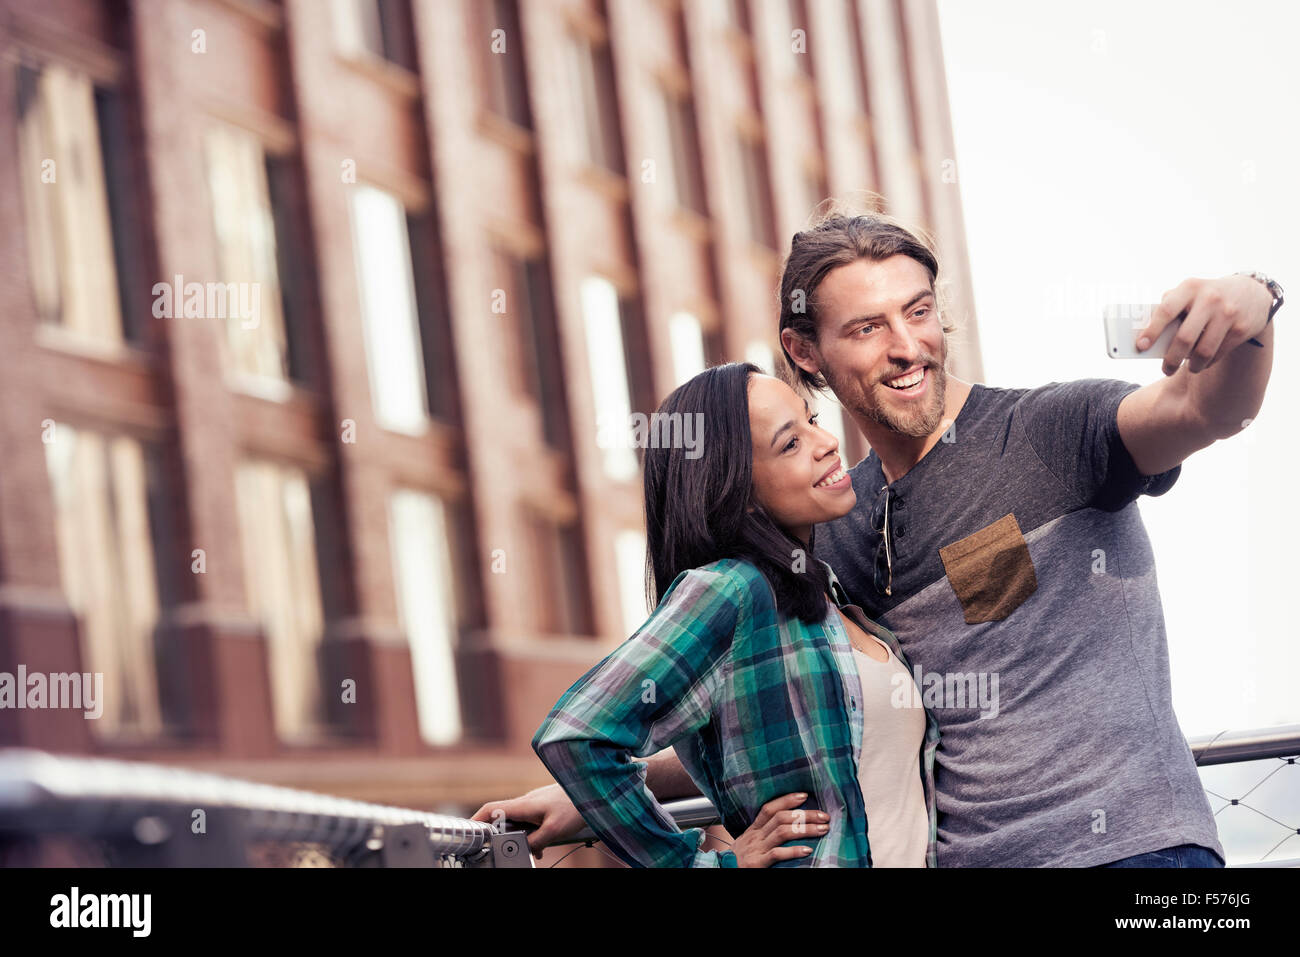 A couple, man and woman taking a selfie by a large building in the city Stock Photo